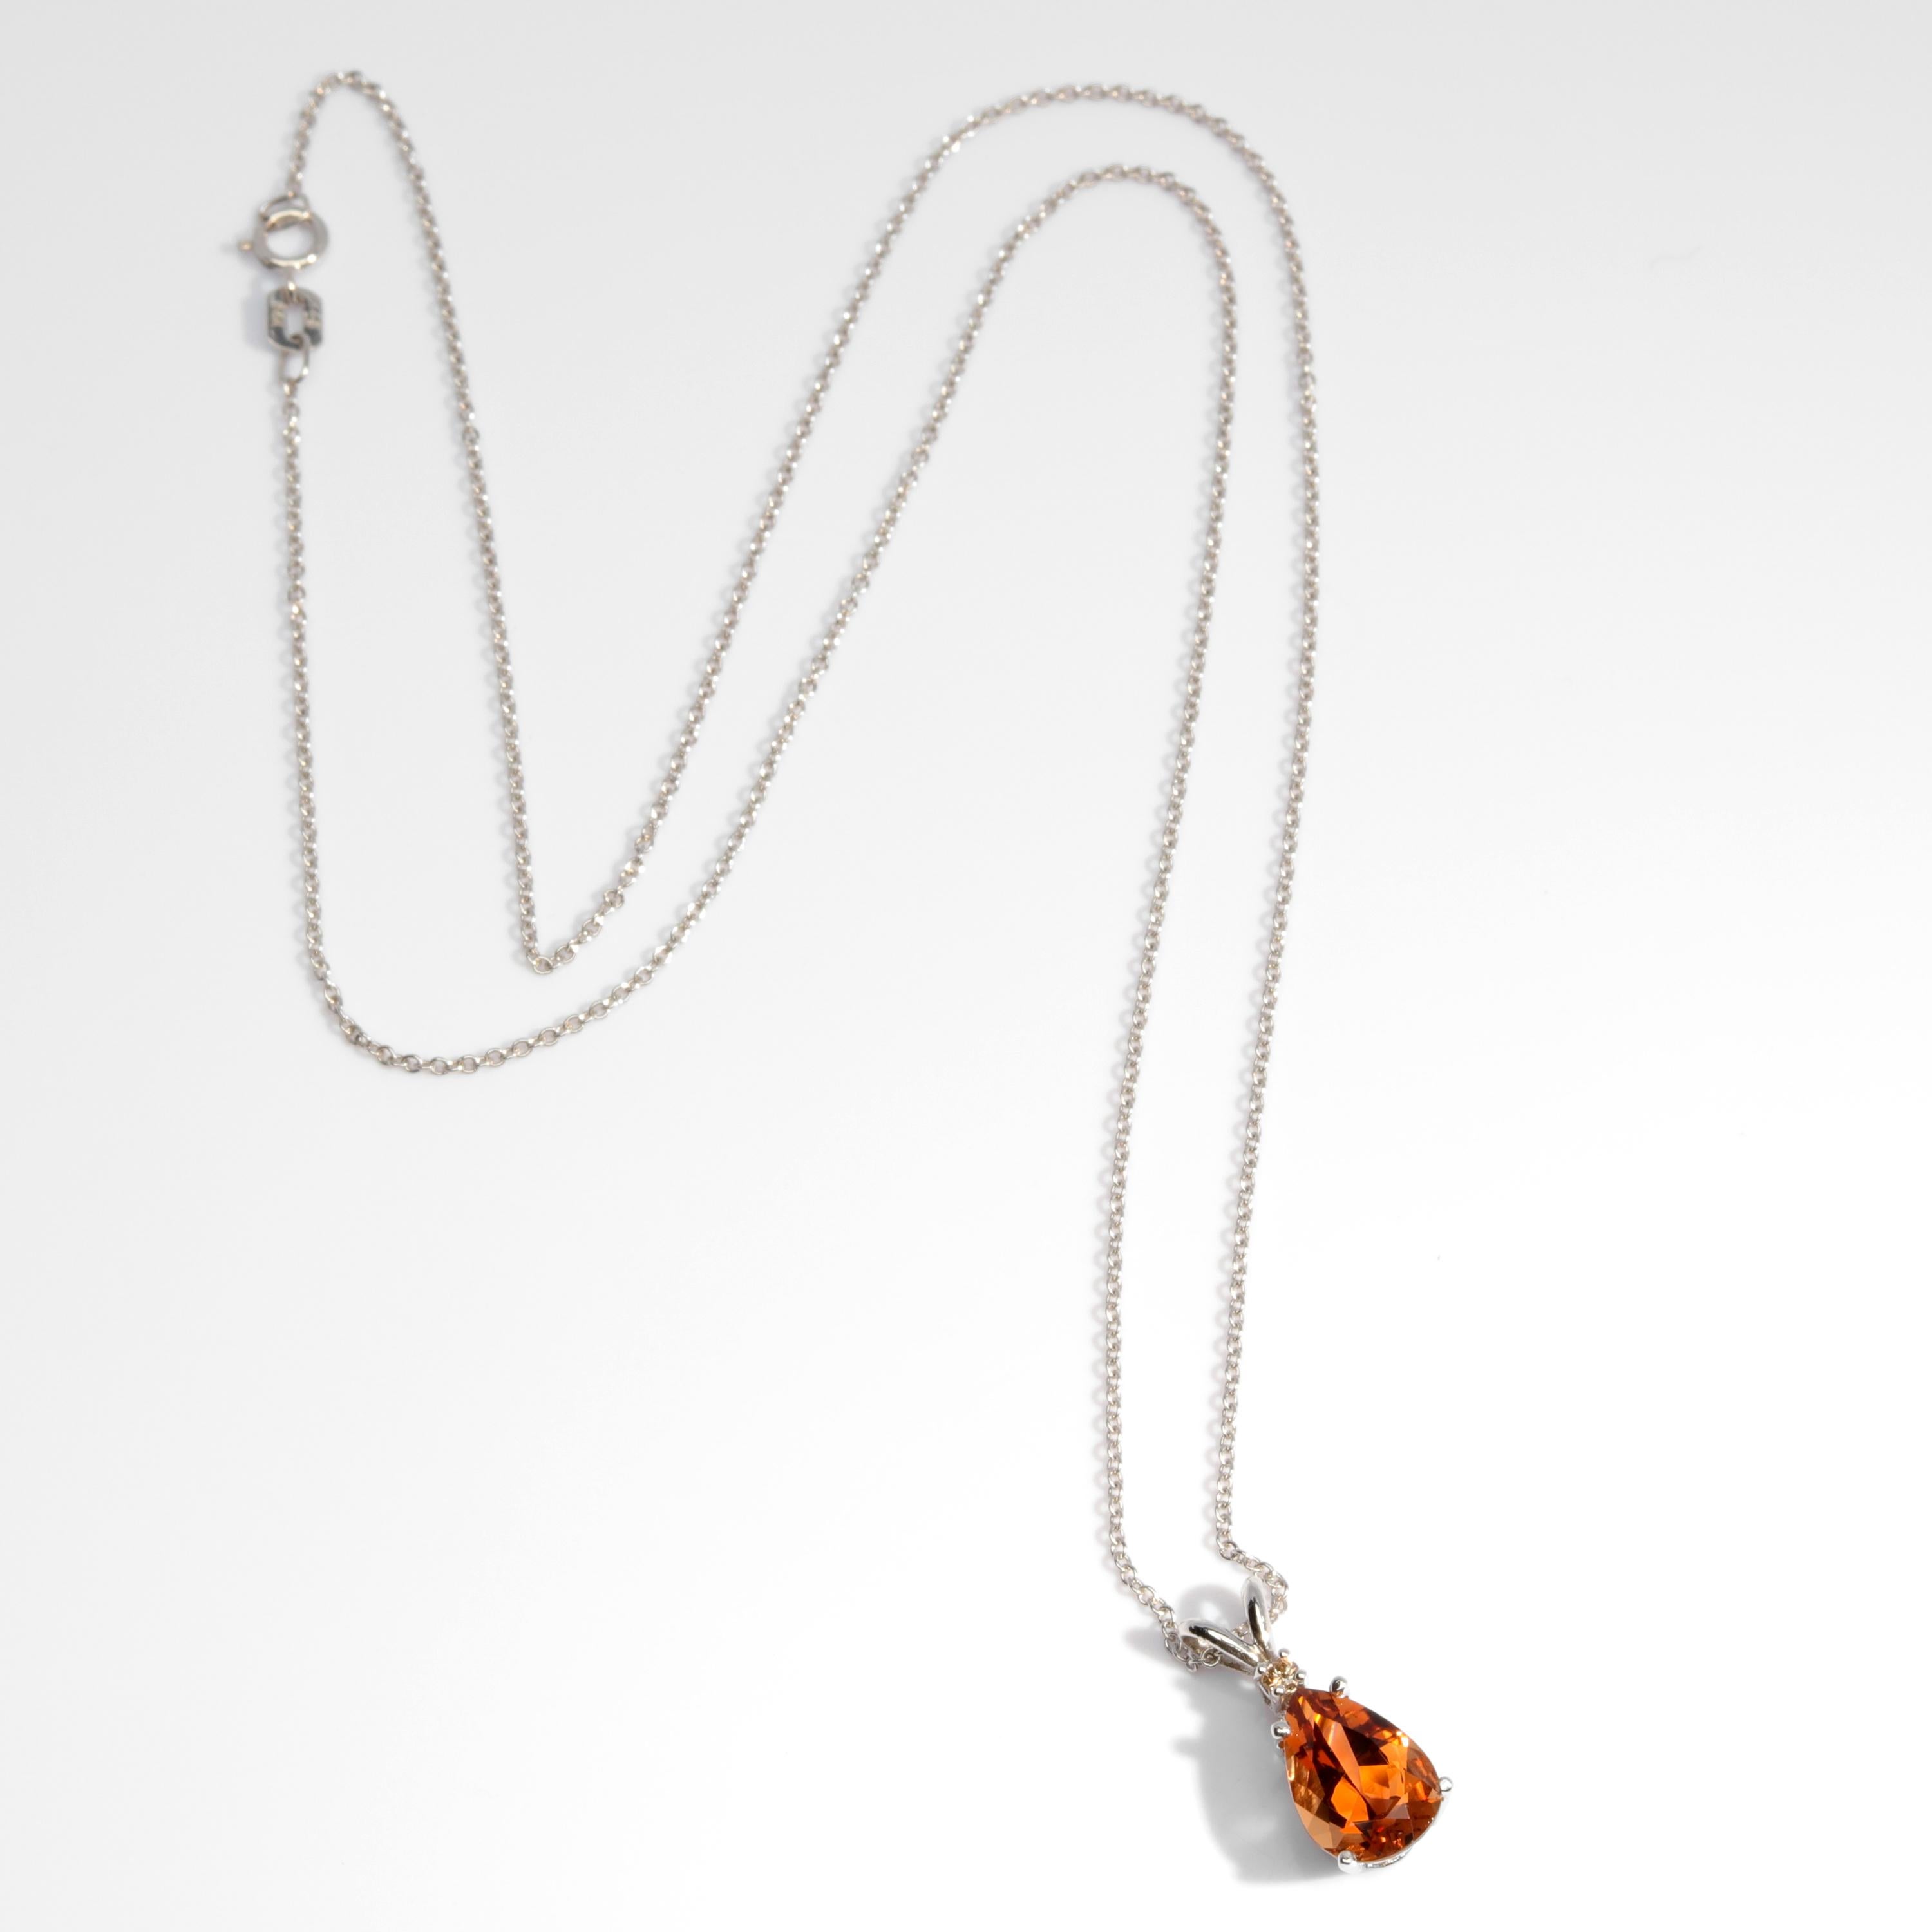 A pear-cut precious topaz the color of fine aged whiskey is crowned with a tiny brilliant diamond and suspended from a delicate white gold chain. The topaz is natural and measures approximately 10mm x 7.13mm and weighs just over 2-carats (2.14). 